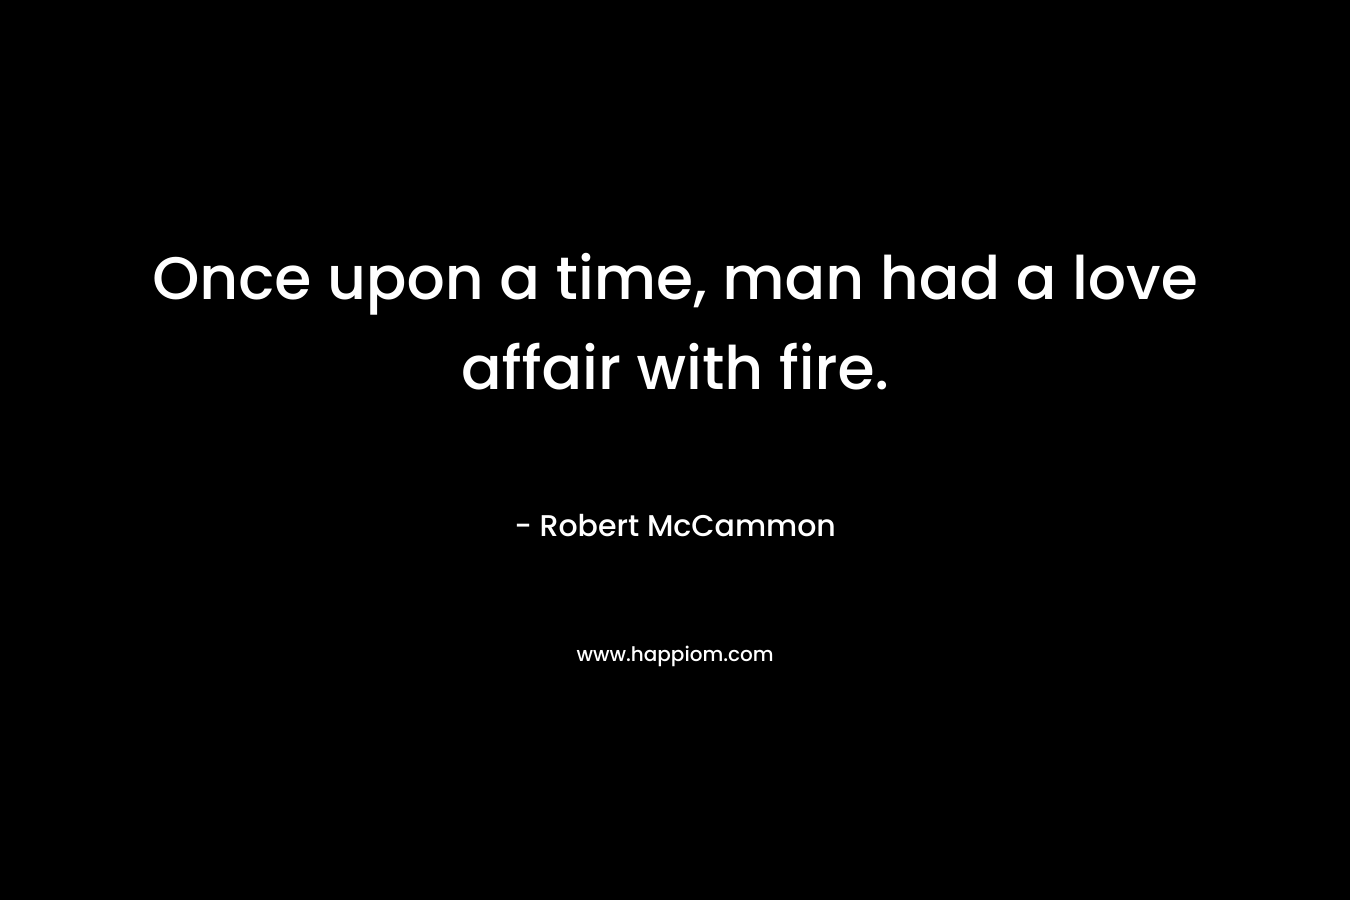 Once upon a time, man had a love affair with fire. – Robert McCammon